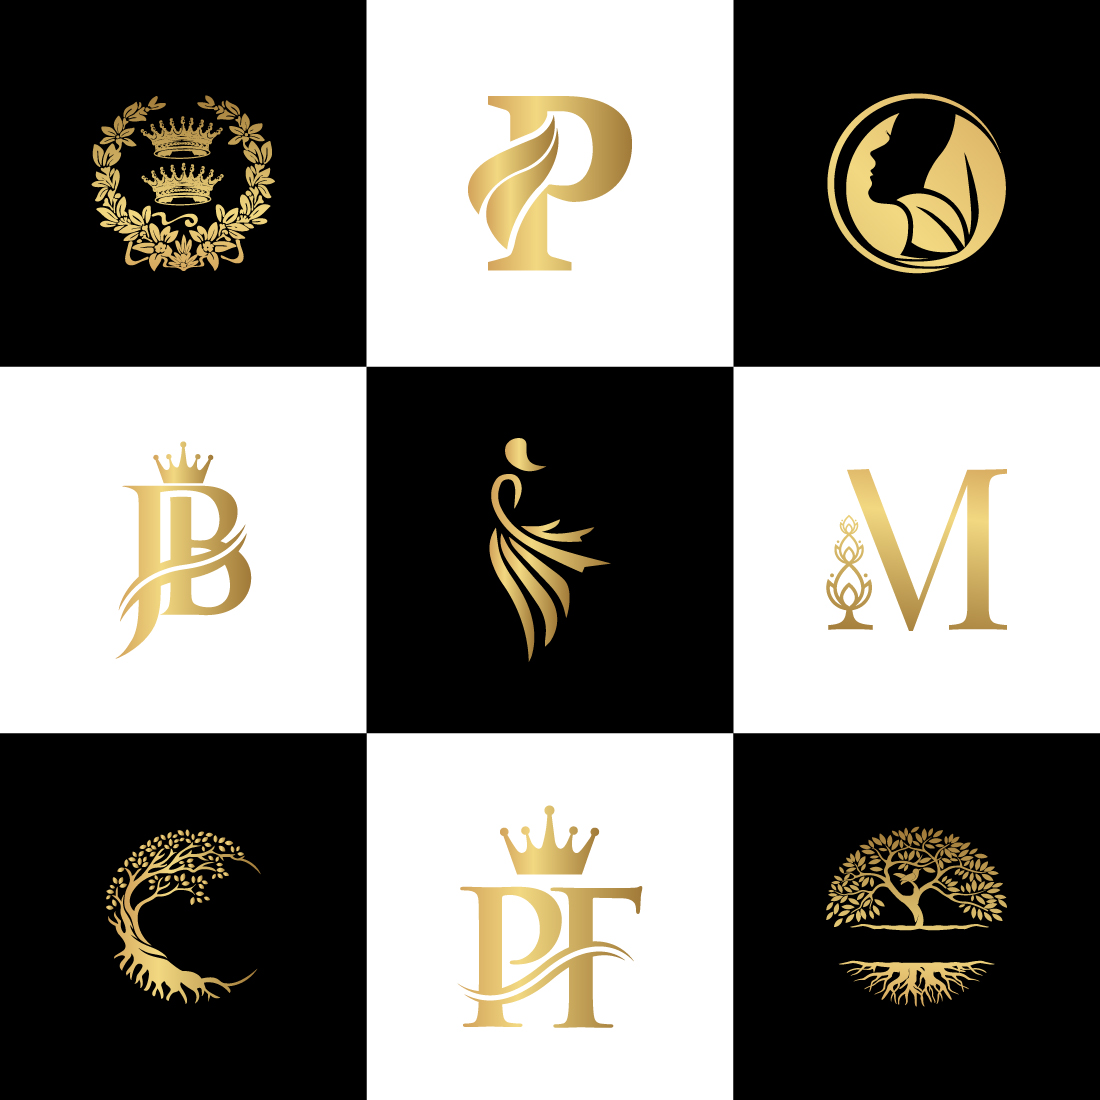 Set of images with exquisite luxury logos in gold color.